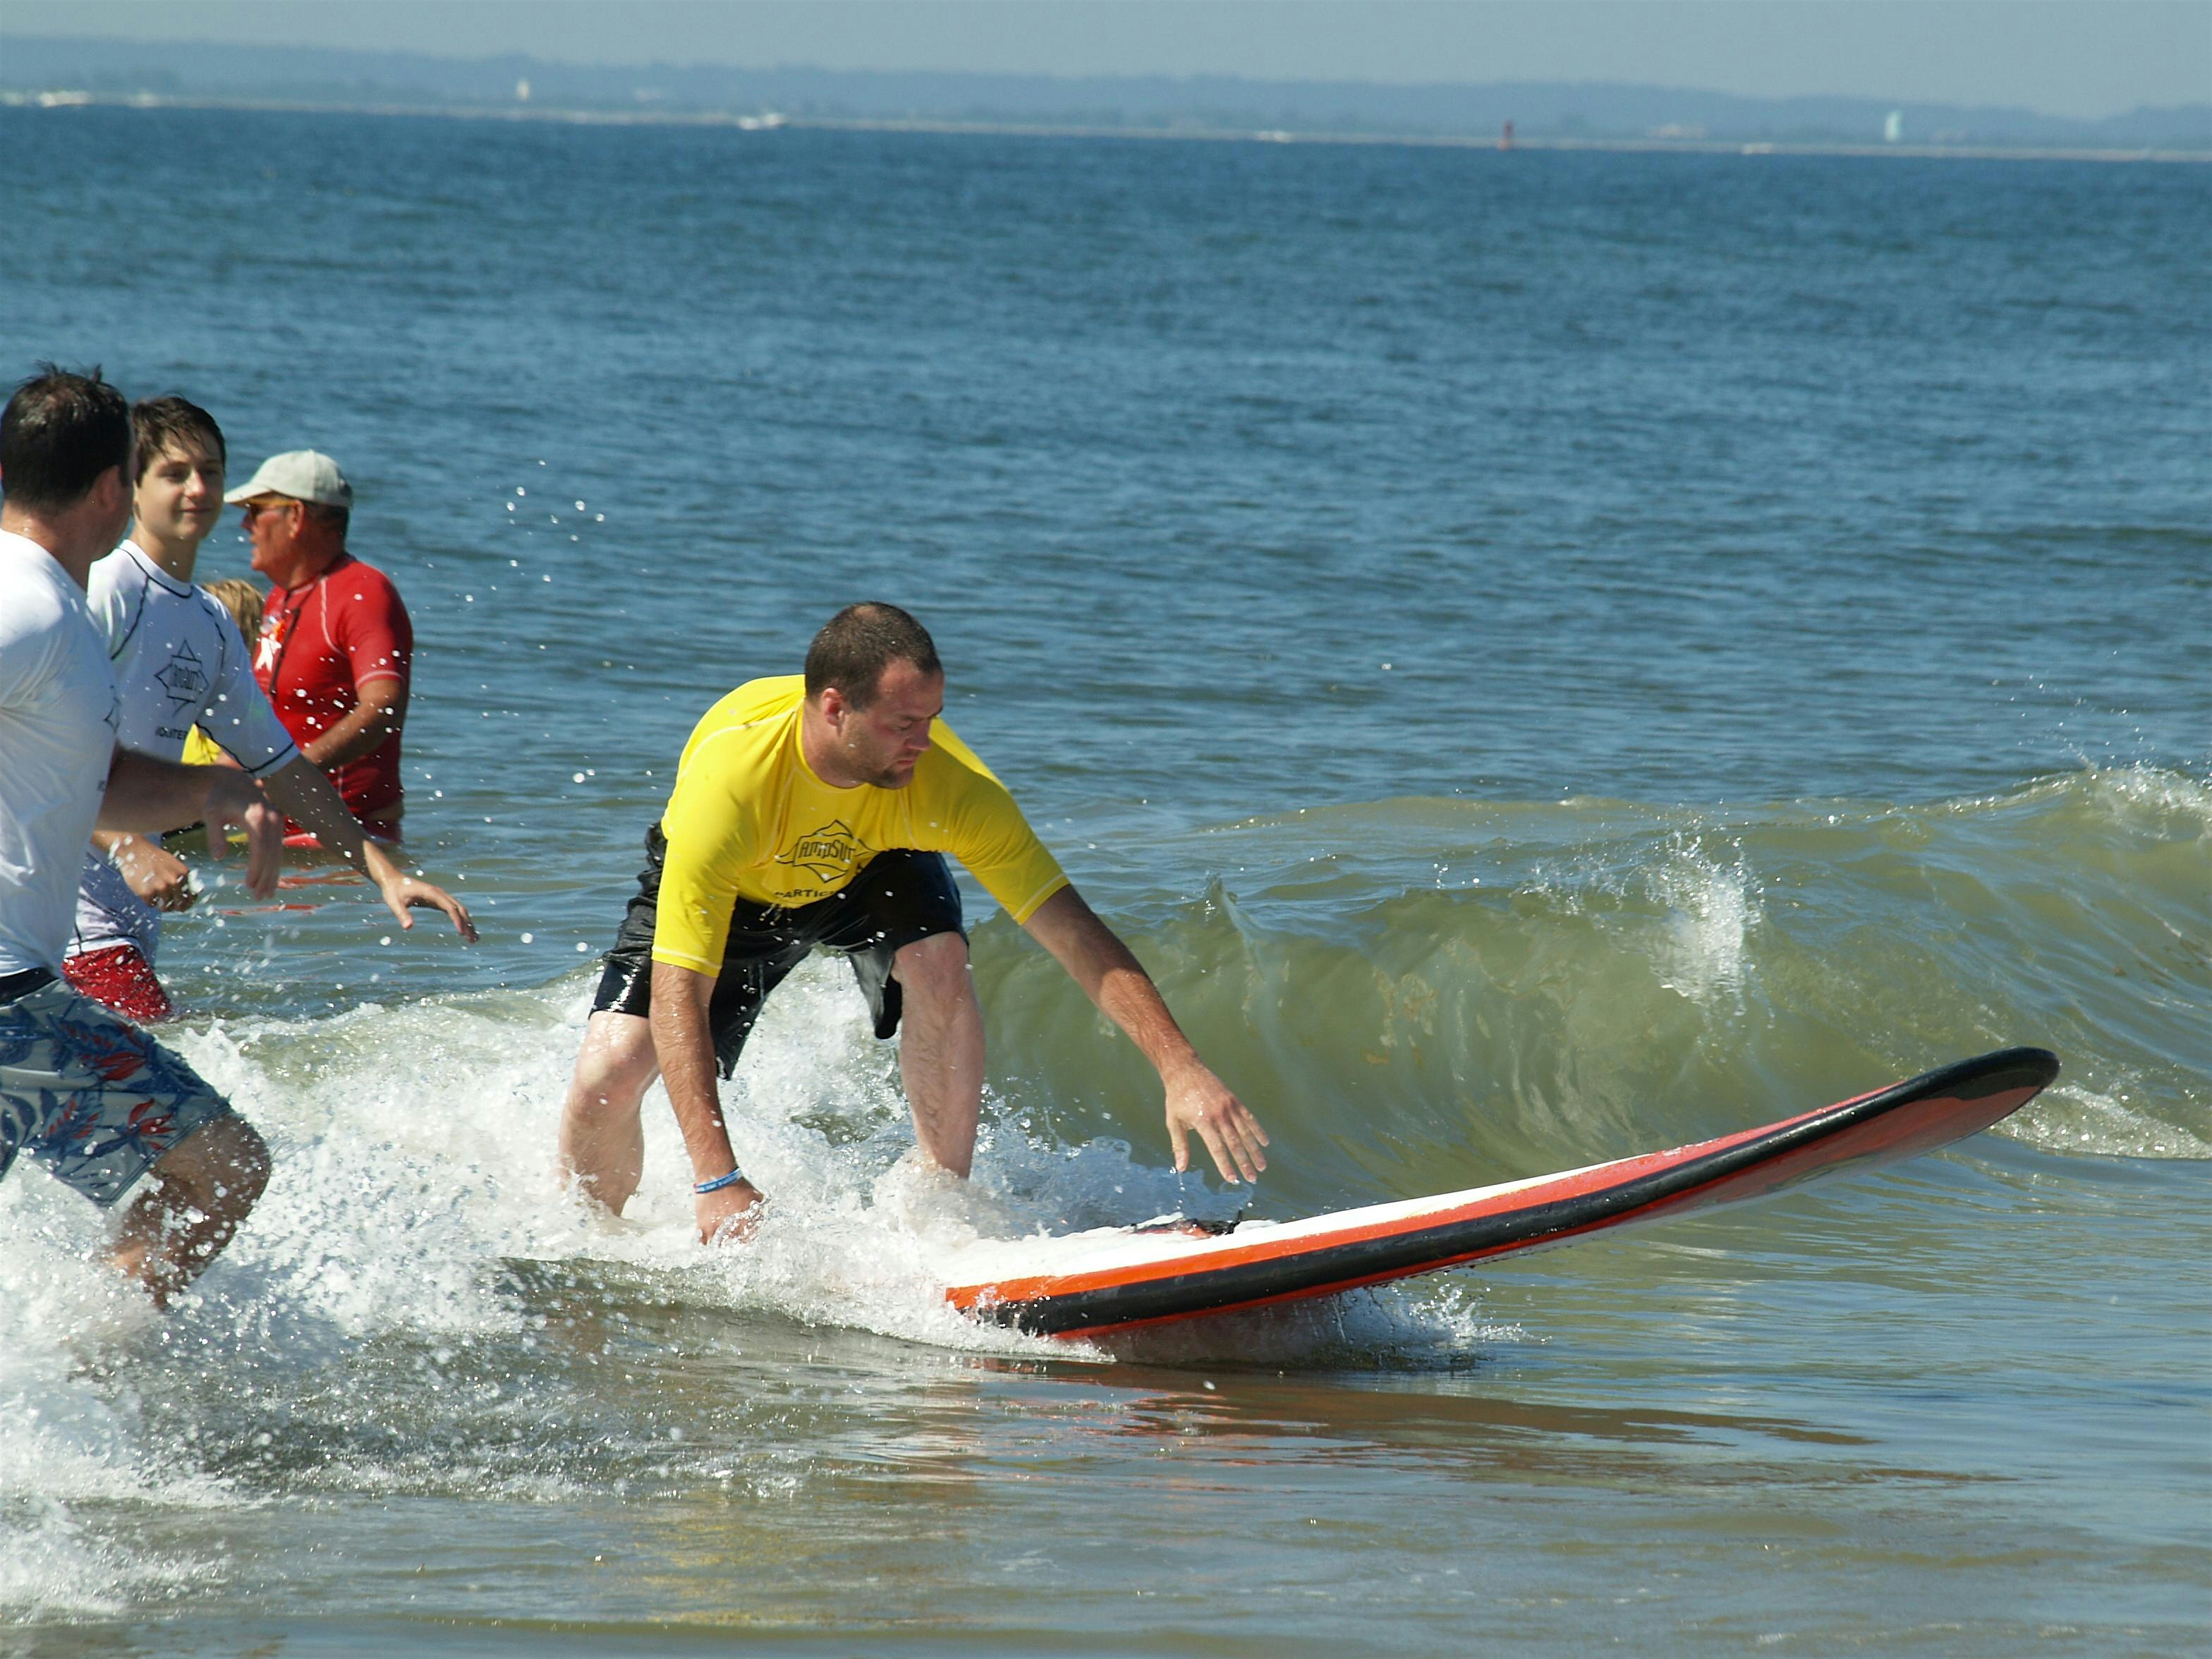 AmpSurf NY, Learn to Surf Clinic, August 24th, Rockaway Beach, New York